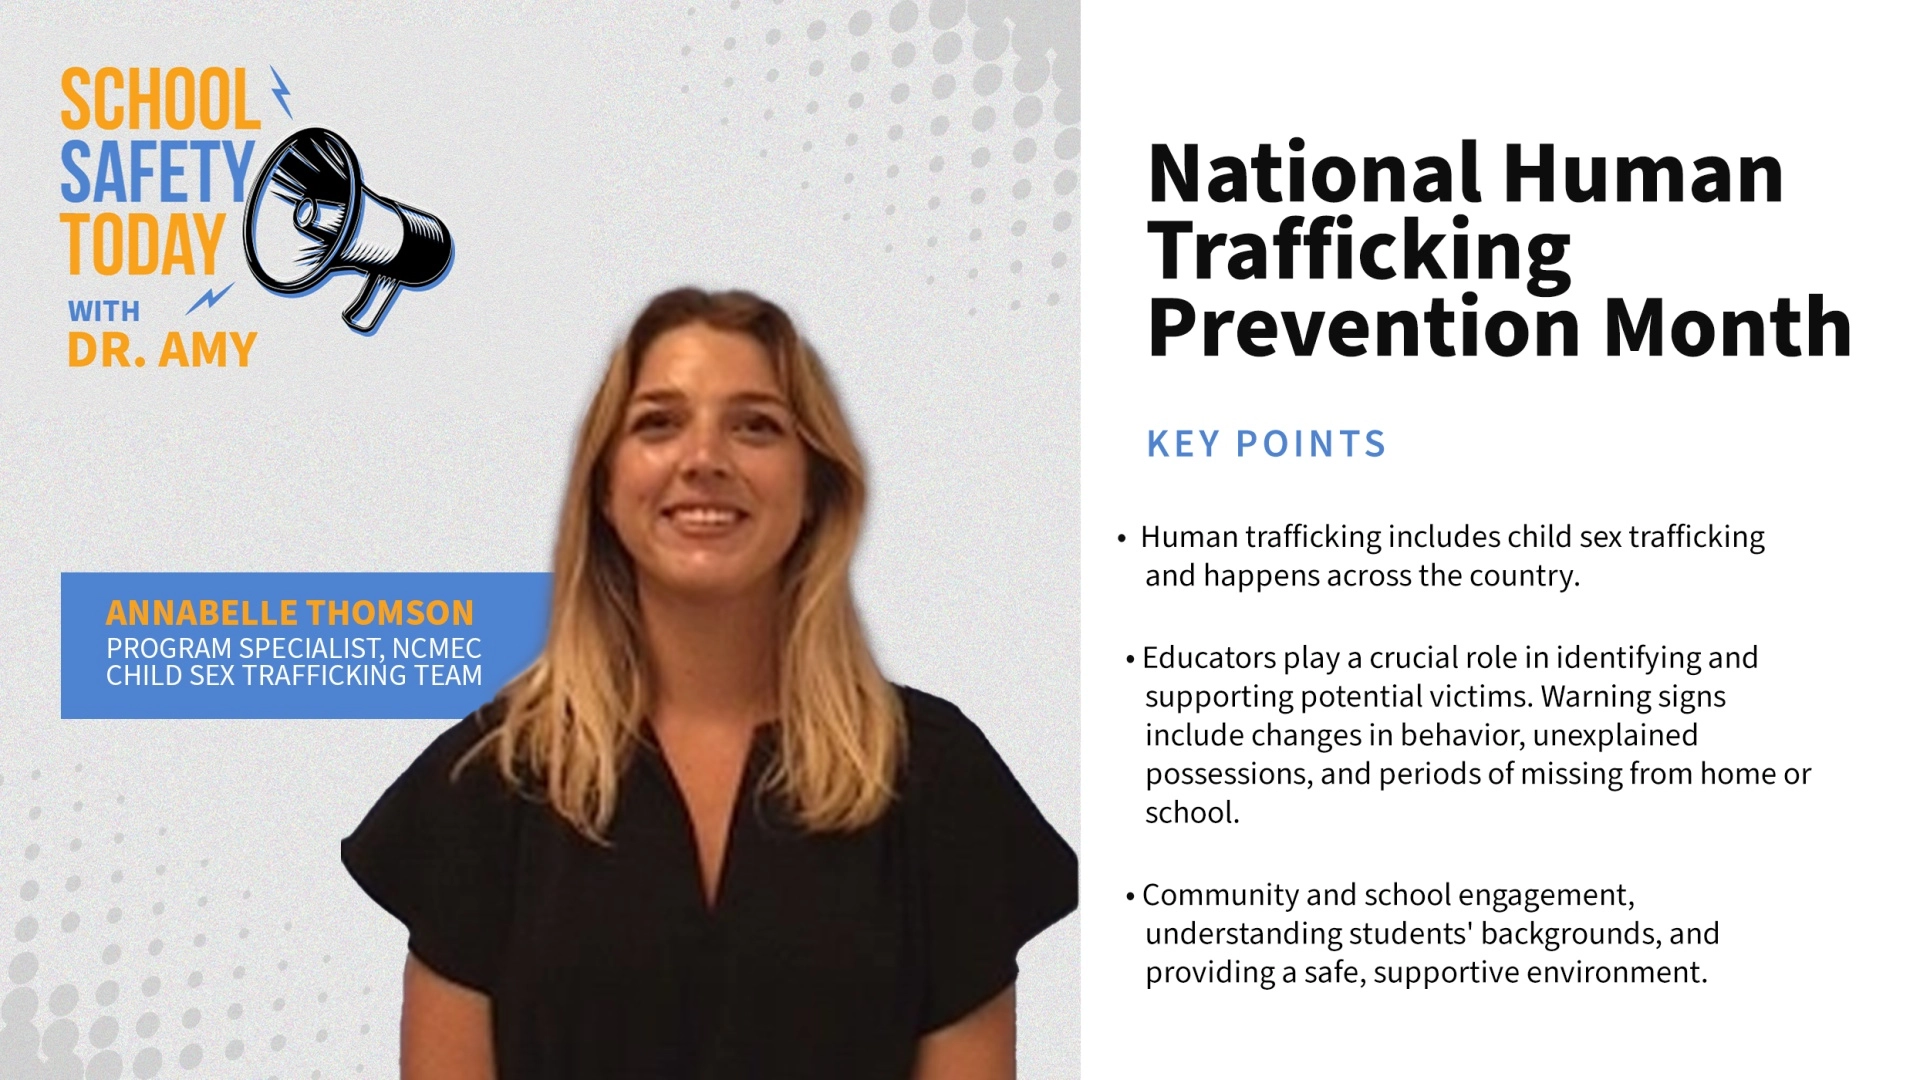 National Human Trafficking Prevention Month